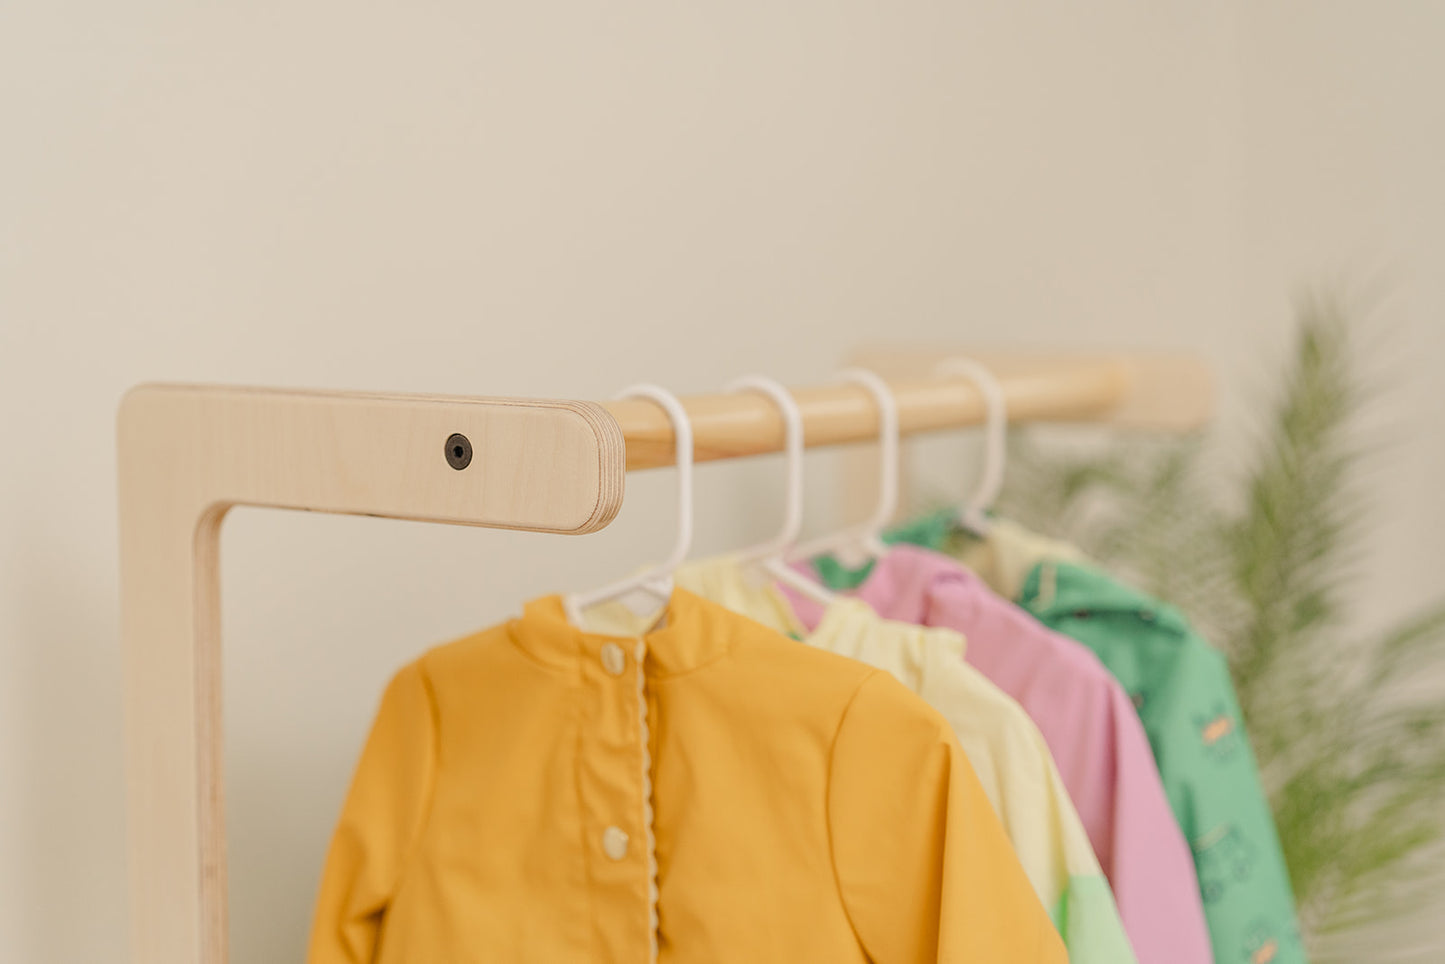 wooden child size clothing rack with kids jackets neatly hanging